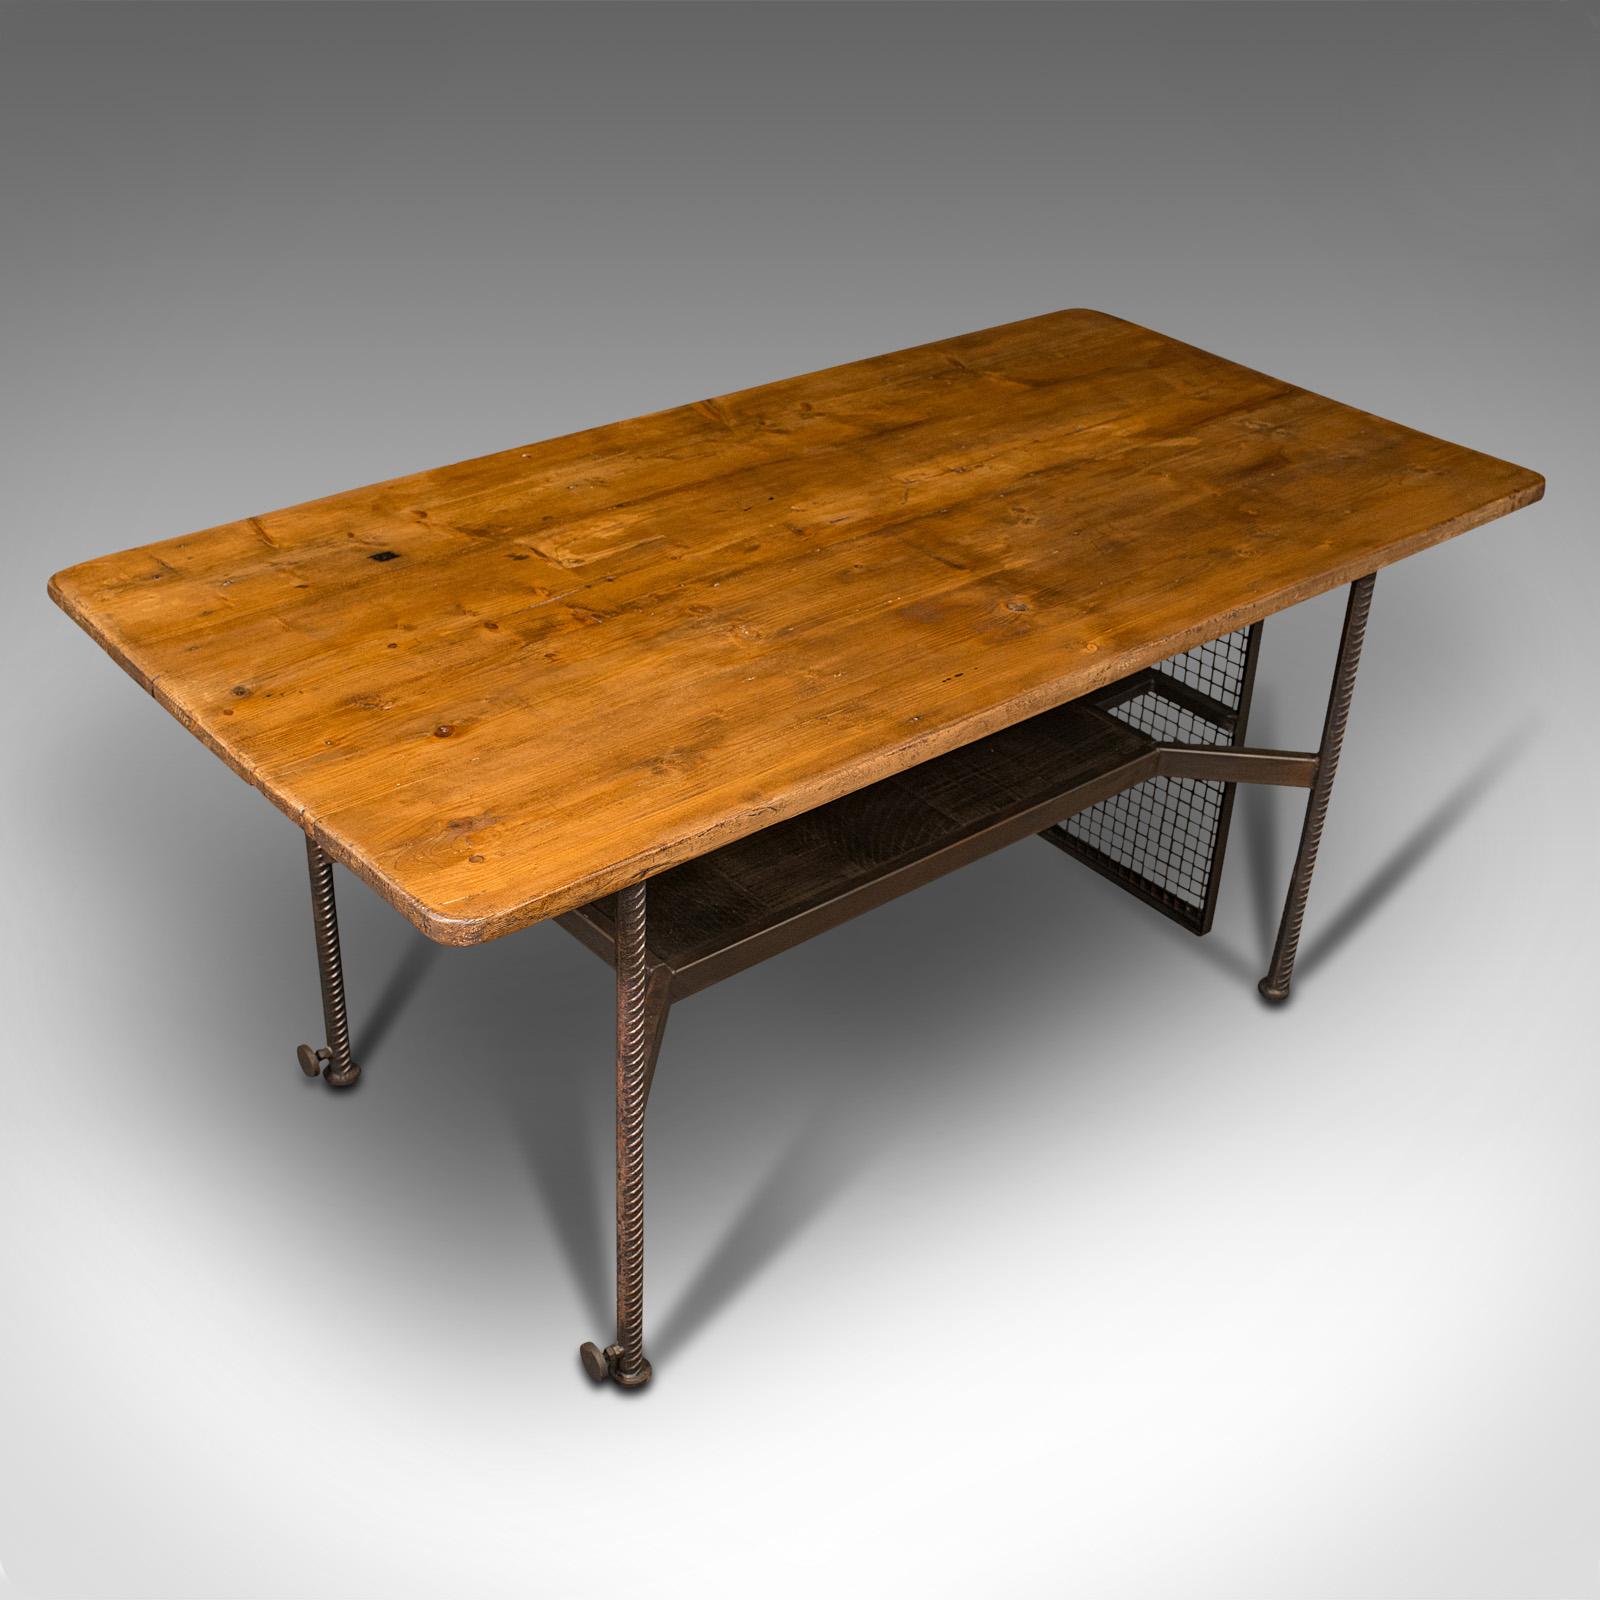 20th Century Vintage Writing Desk, English, Steel, Victorian Pine, Shop Retail, Display Table For Sale